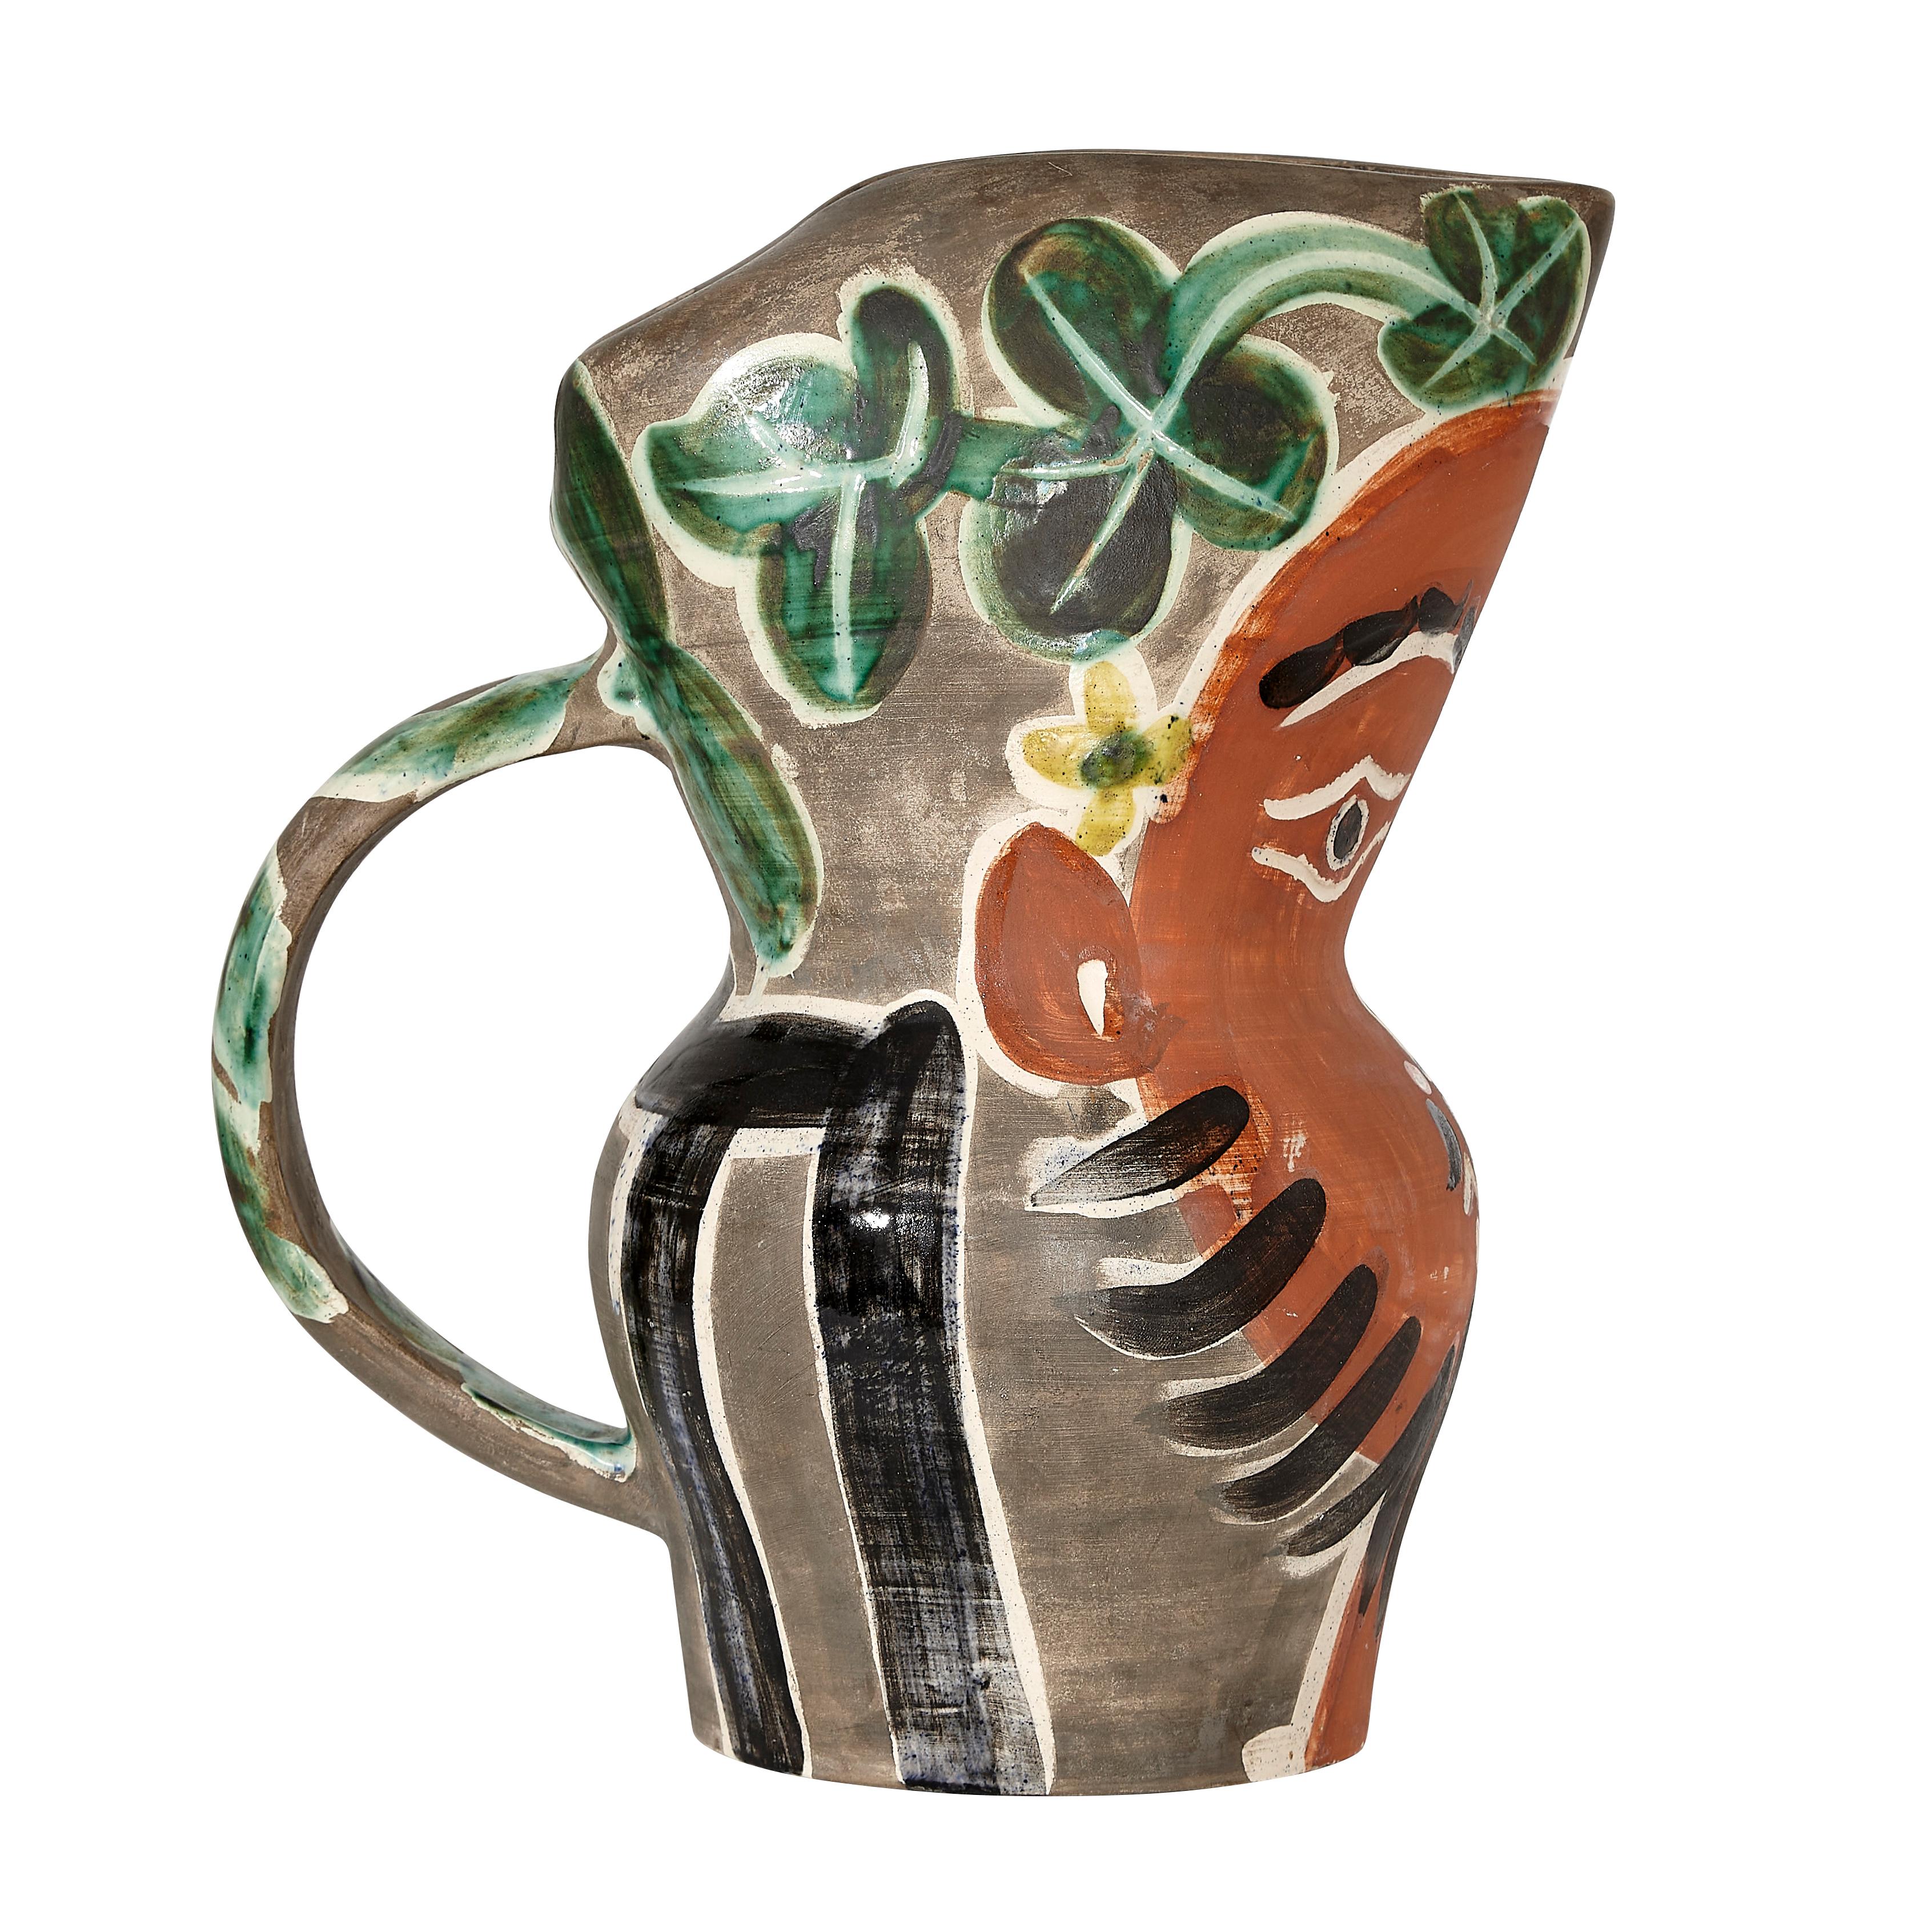 PABLO PICASSO (1881-1973)
Le barbu (A. R. 217)

Terre de faïence pitcher, painted in colors and partially glazed, 1953, from the edition of 500, inscribed 'Edition Picasso' and 'Madoura', with the Edition Picasso and Madoura stamps.